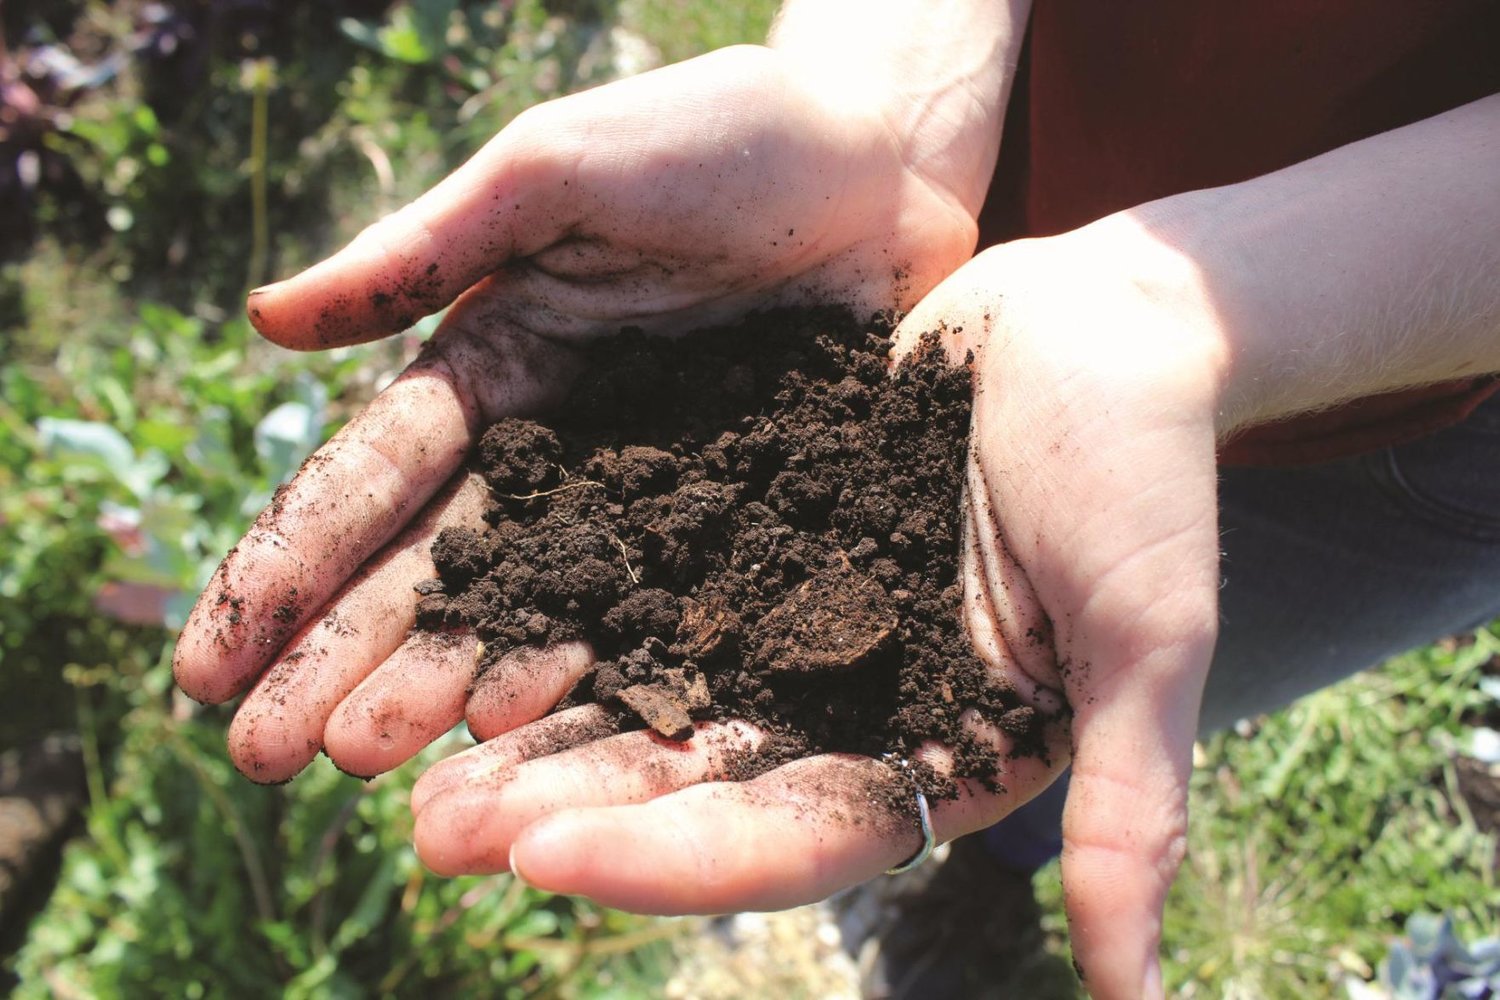 The soil in Chimacum is rich with beneficial bacteria, fungi, worms, beetles, and hundreds of other organisms.